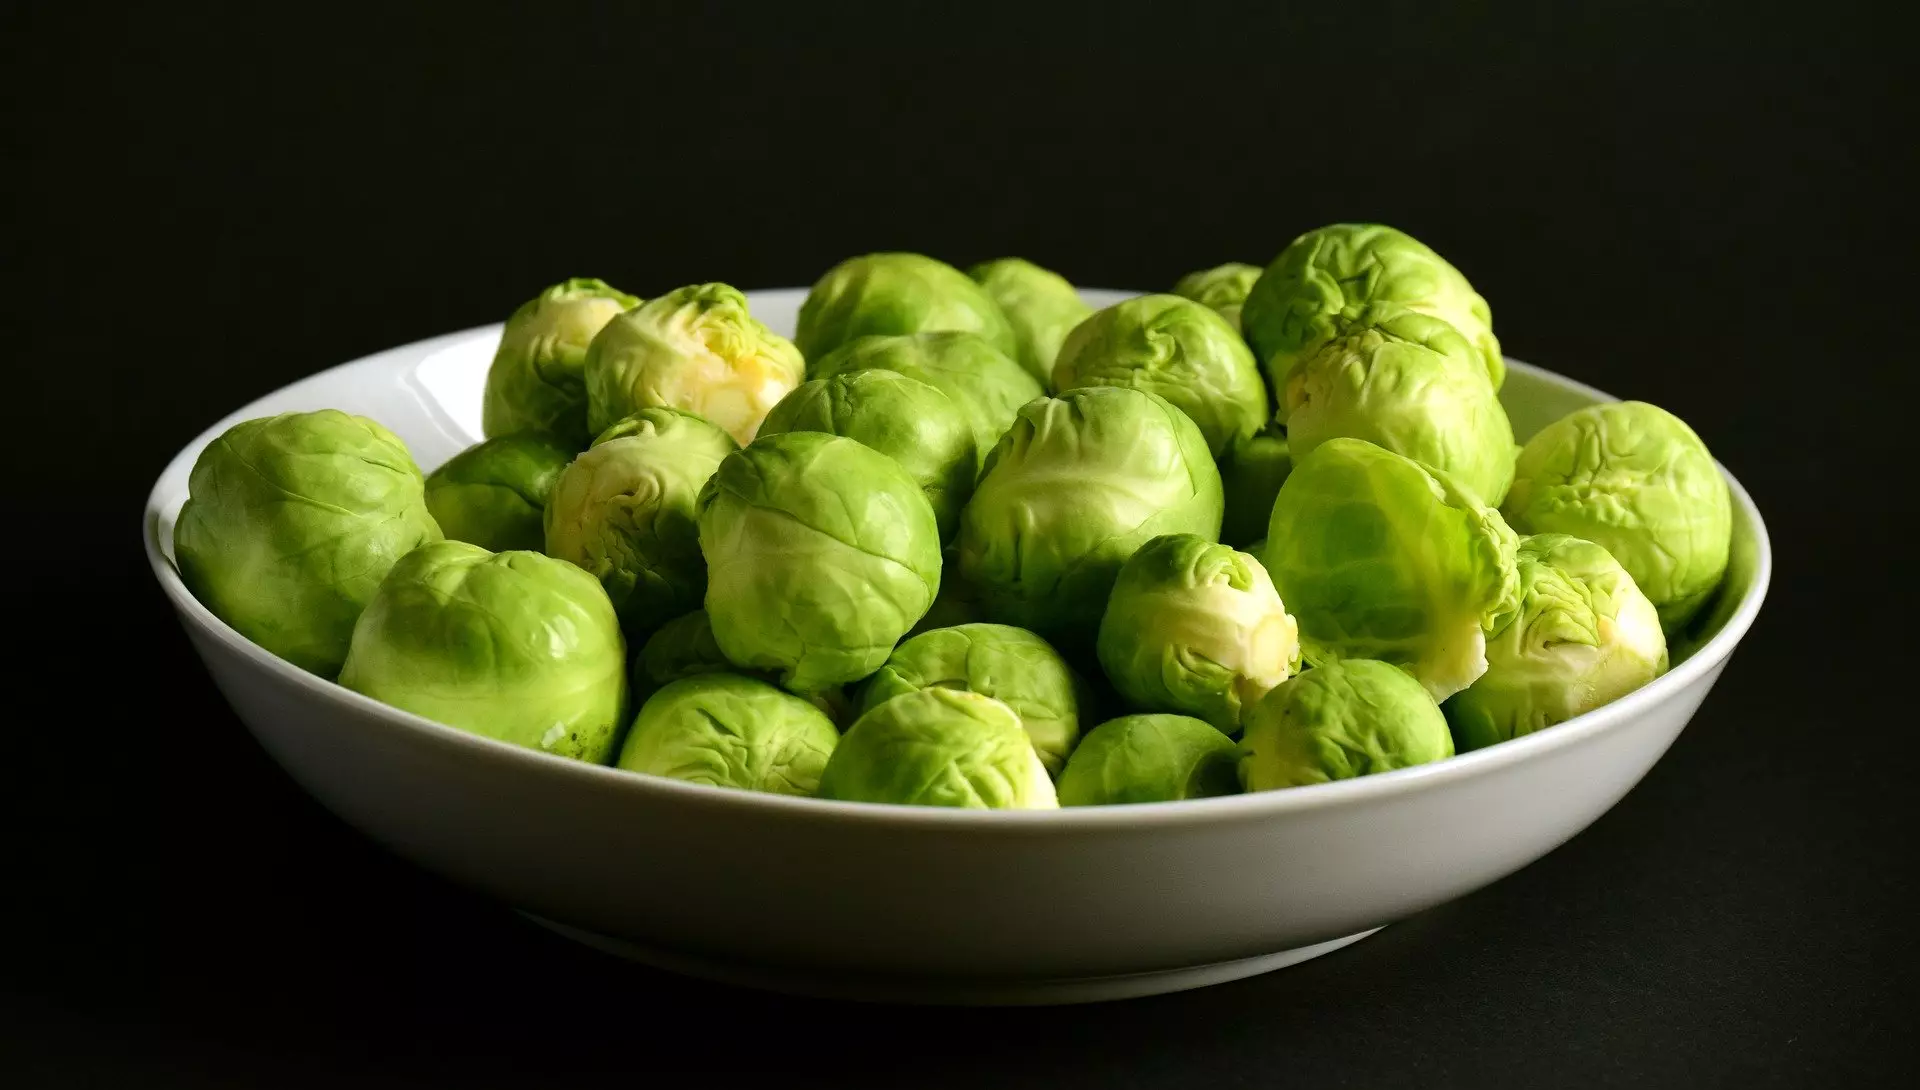 Fans of Bounty chocolates also liked Brussels sprouts (